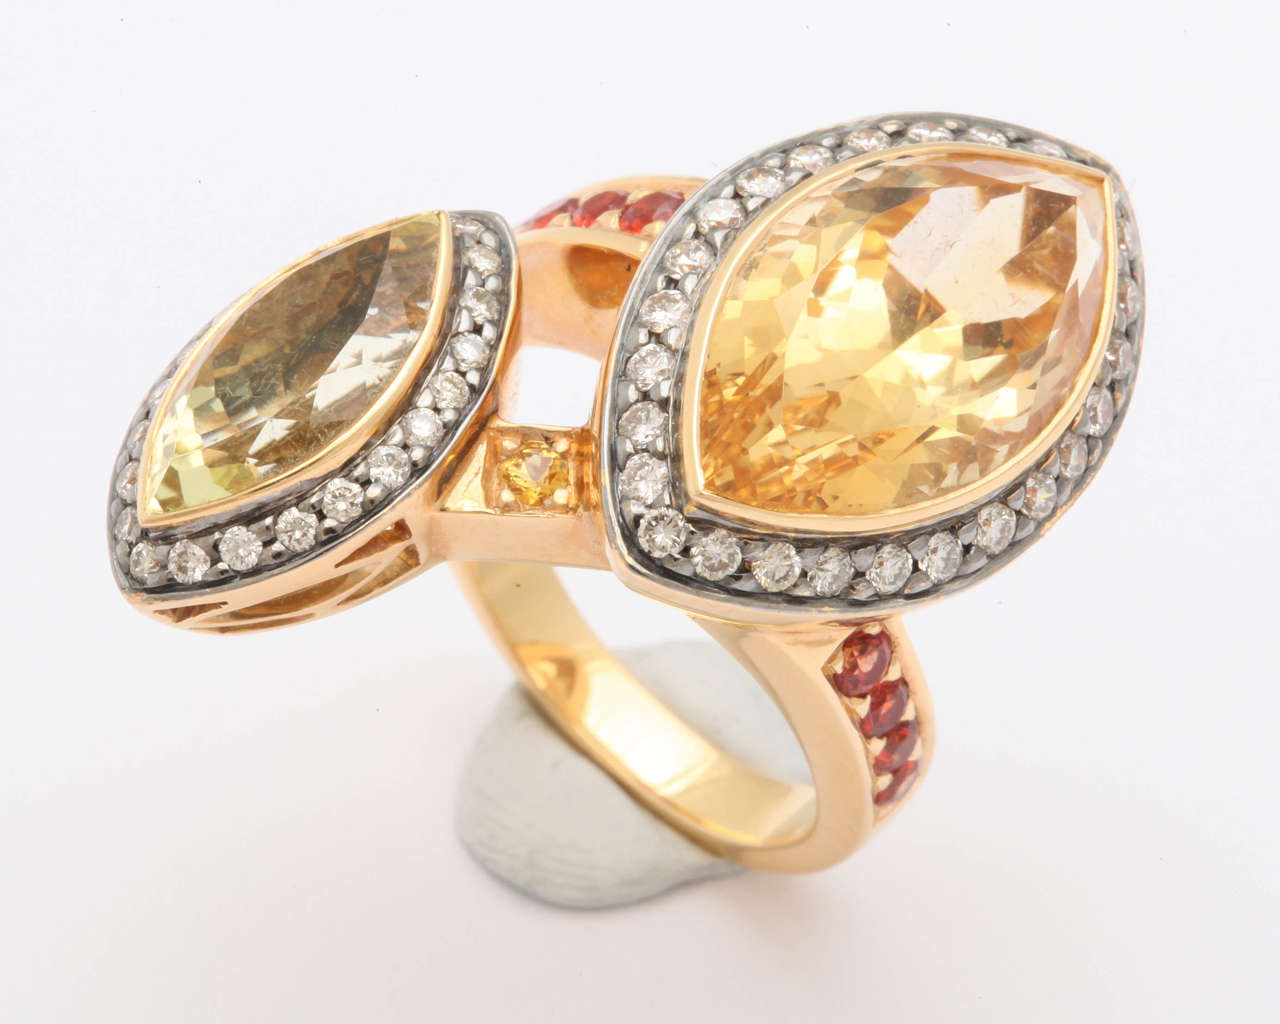 This magnificent bypass ring has an 8 ct marquise citrine and a 3 ct scapolite marquise. The main stones are surrounded by .75 ct white diamonds and .50 ct red-orange African sapphire going down the shank of the ring. The rinbg is size 7.5. A real